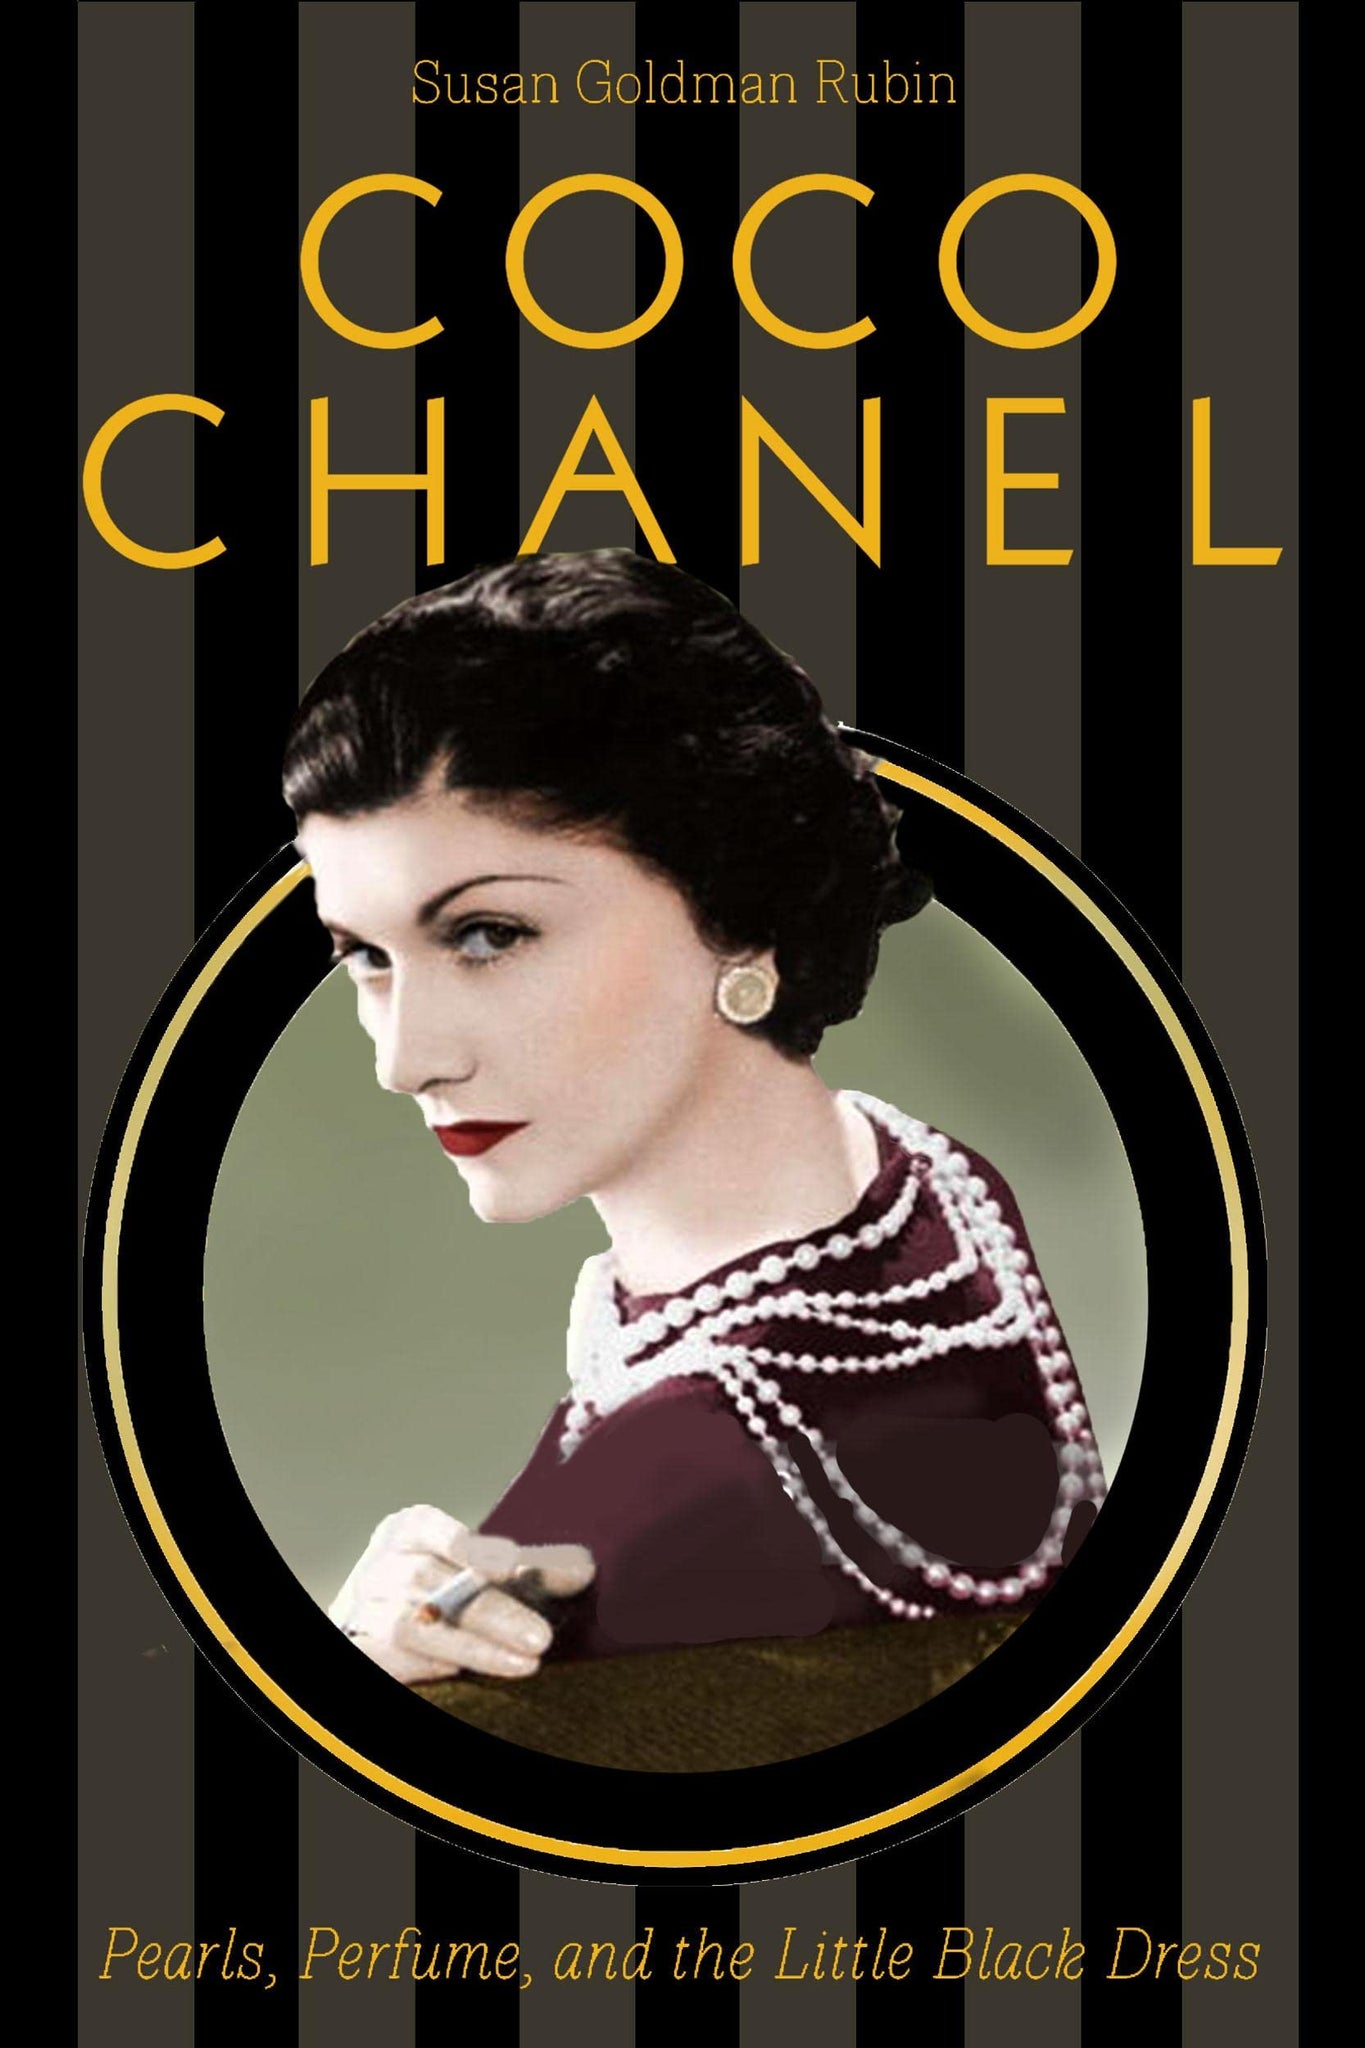 Chanel 3Book Slipcase New Edition Coffee Table Book  ASSOULINE